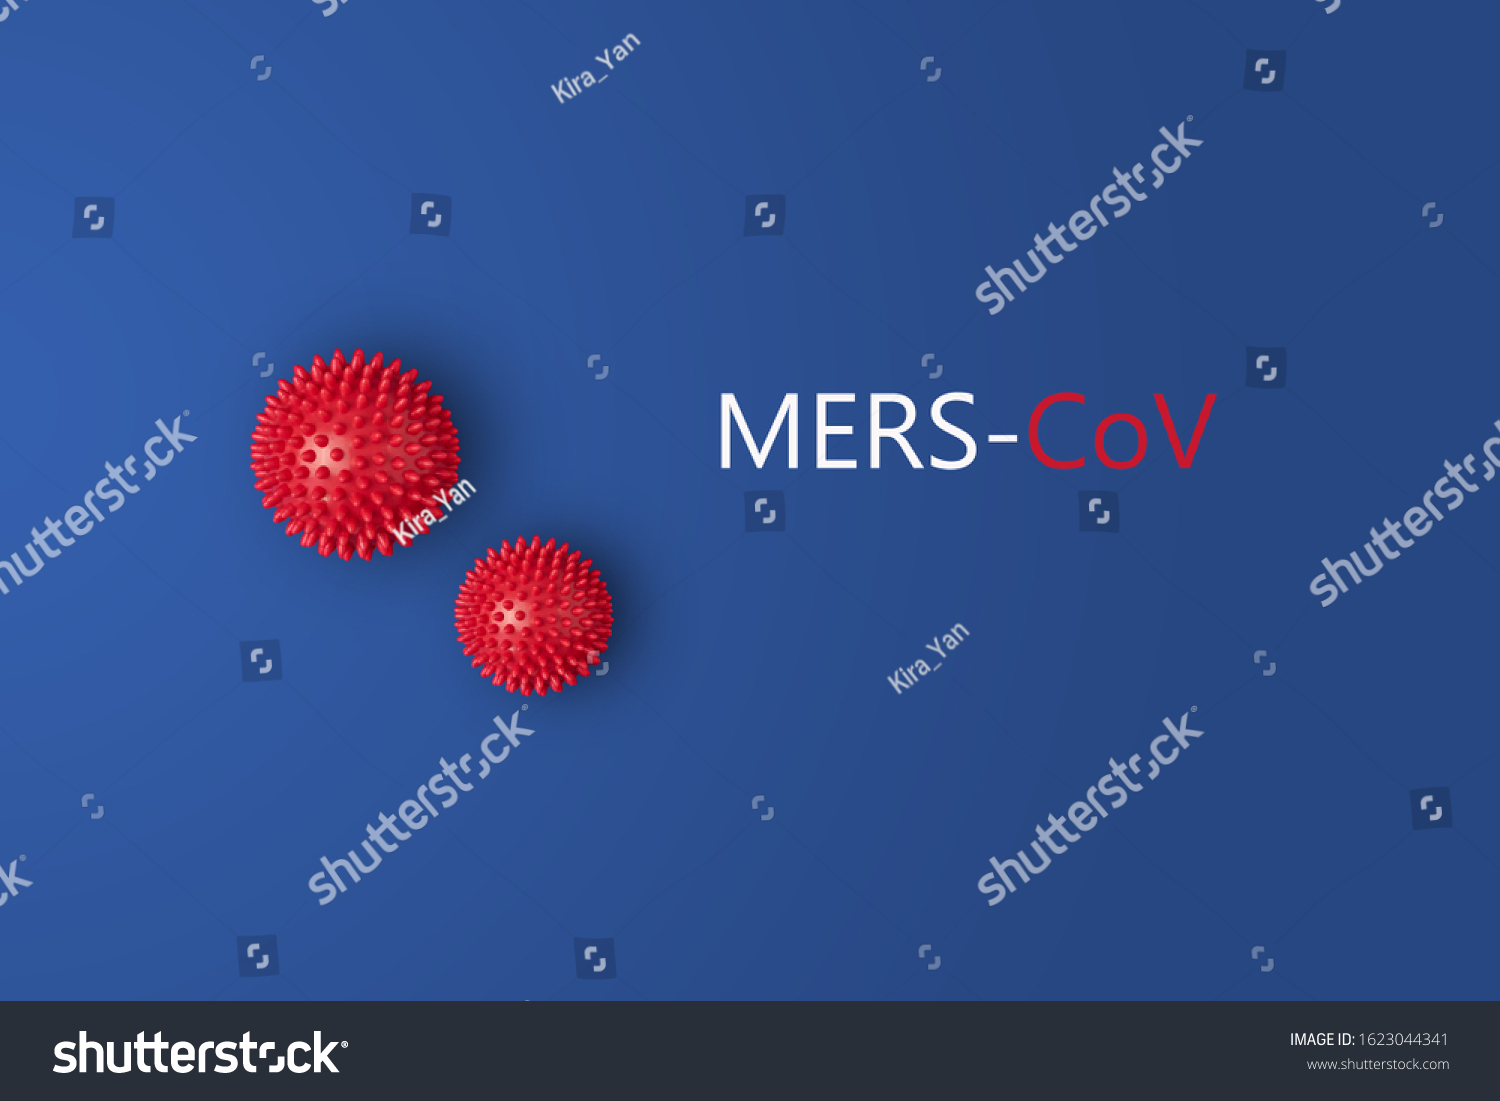 Abstarct virus strain model of MERS-Cov or middle East respiratory syndrome coronavirus and Novel coronavirus 2019-nCoV with text on blue background. Virus Pandemic Protection Concept #1623044341